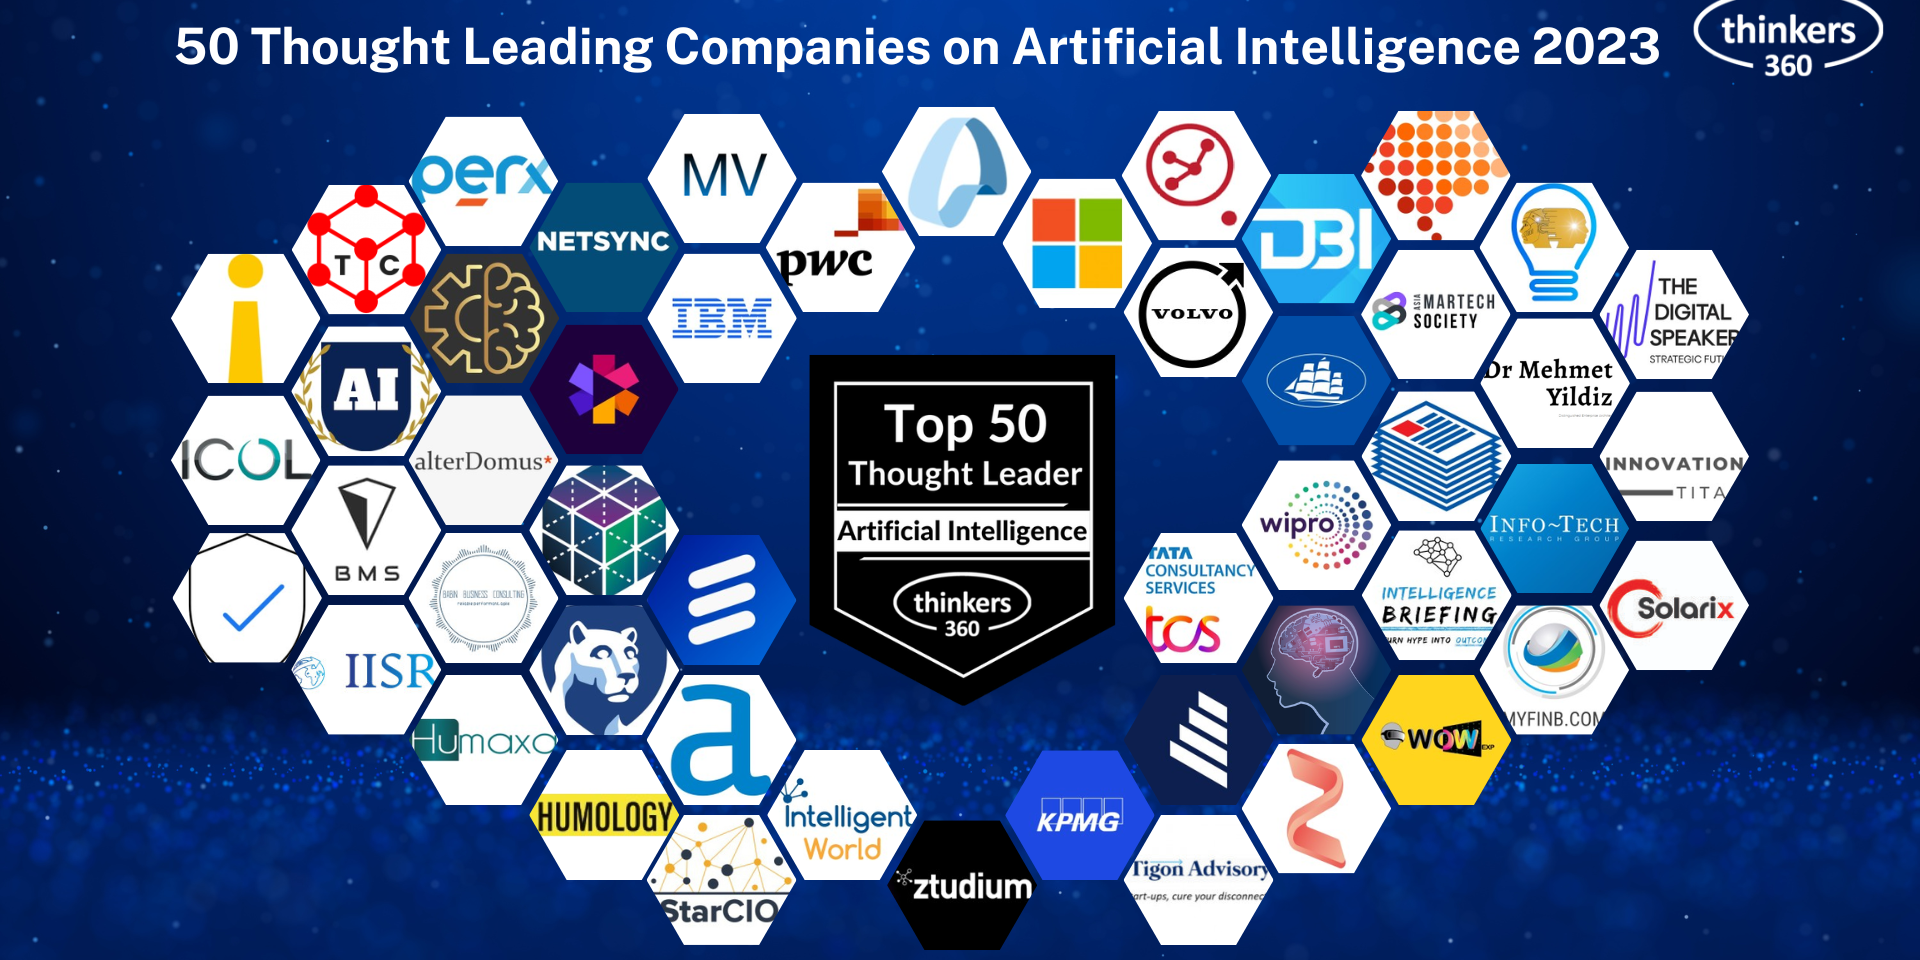 Who is the leading company in AI?